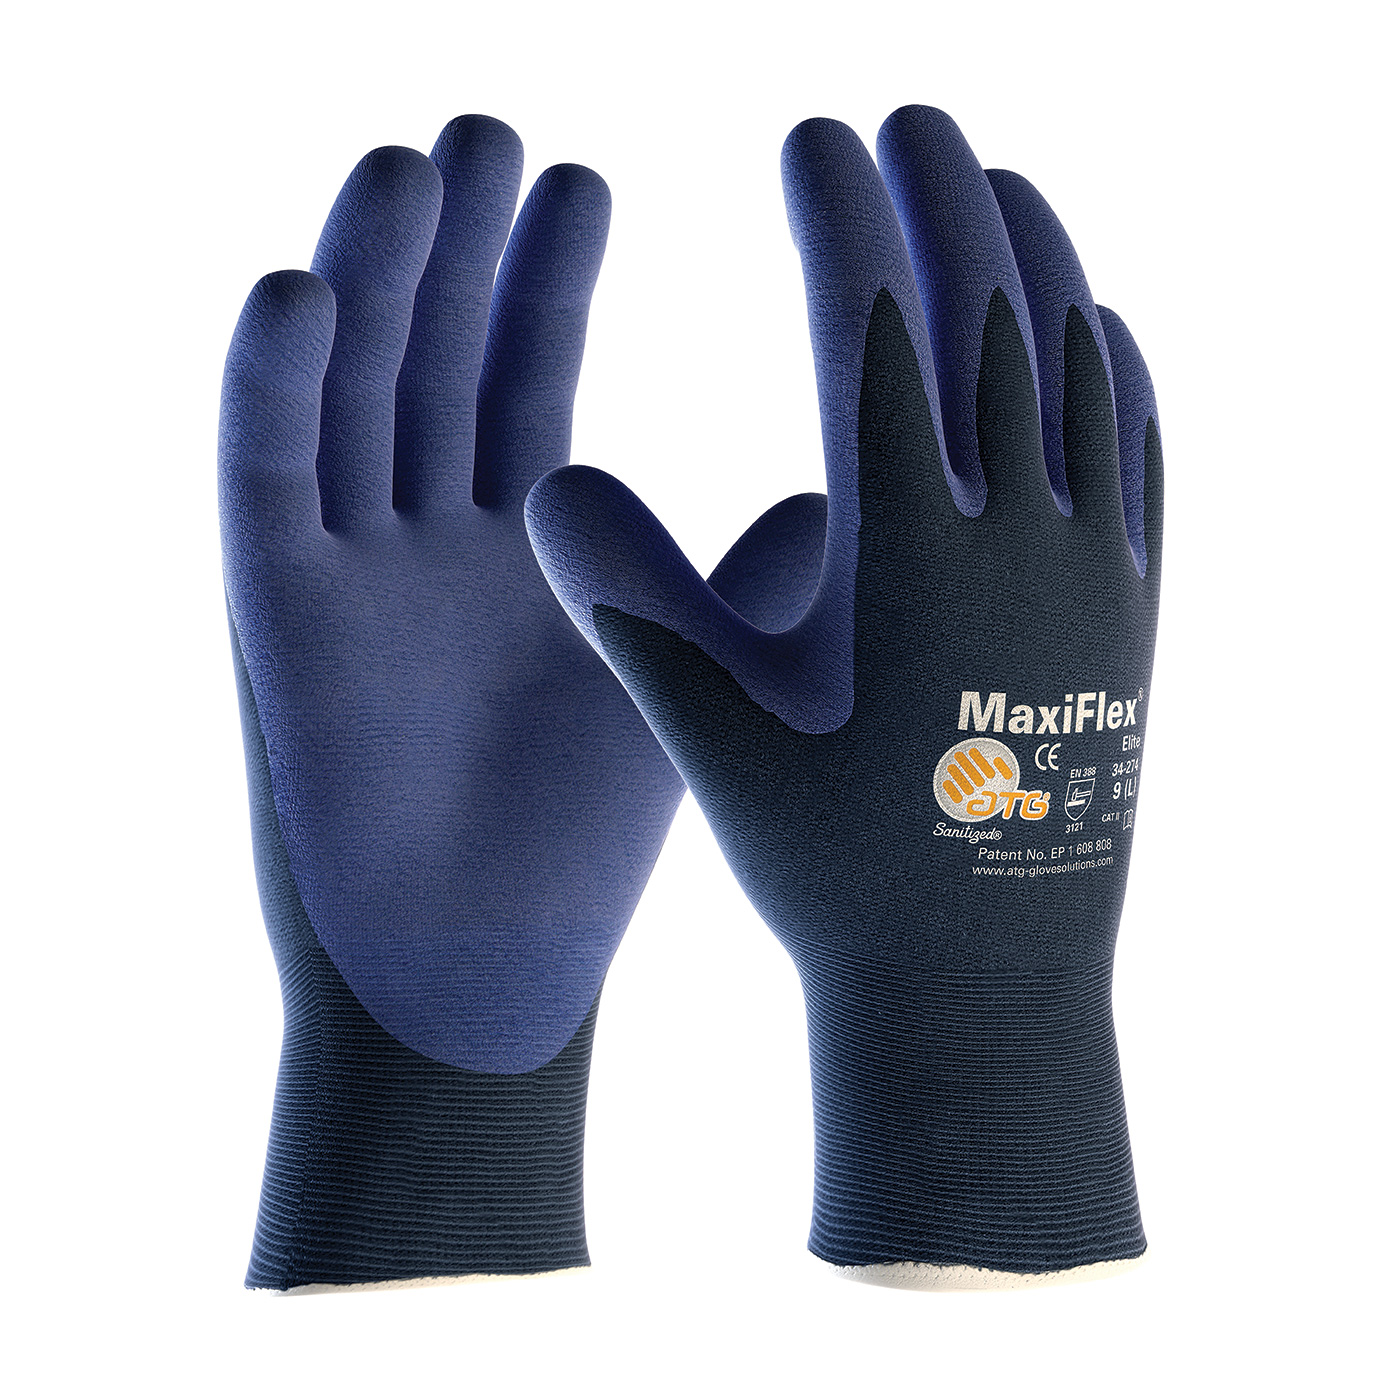 PIP 34-274/L G-Tek GP Seamless Knit Nylon Glove with Nitrile Coated Smooth Grip on Palm & Fingers - Large PID-34 274 L